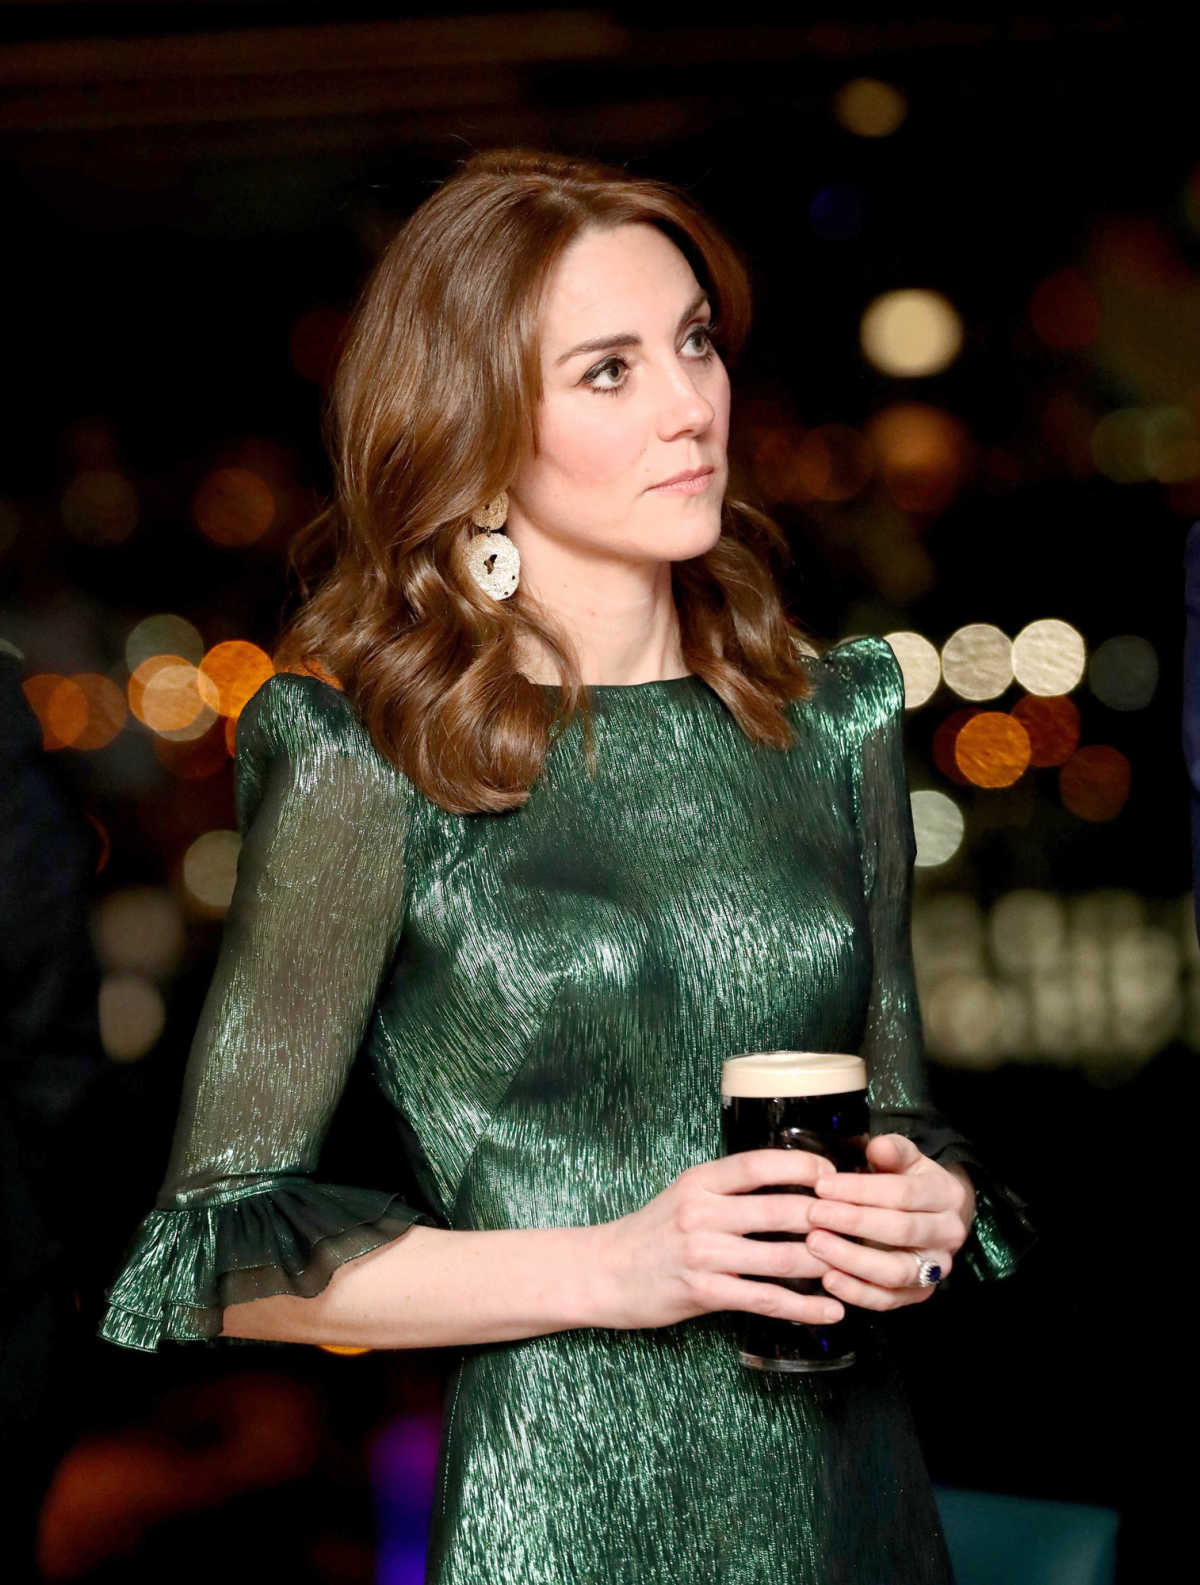 When Kate first joined the royal family she needed help with scripts and used teleprompters.